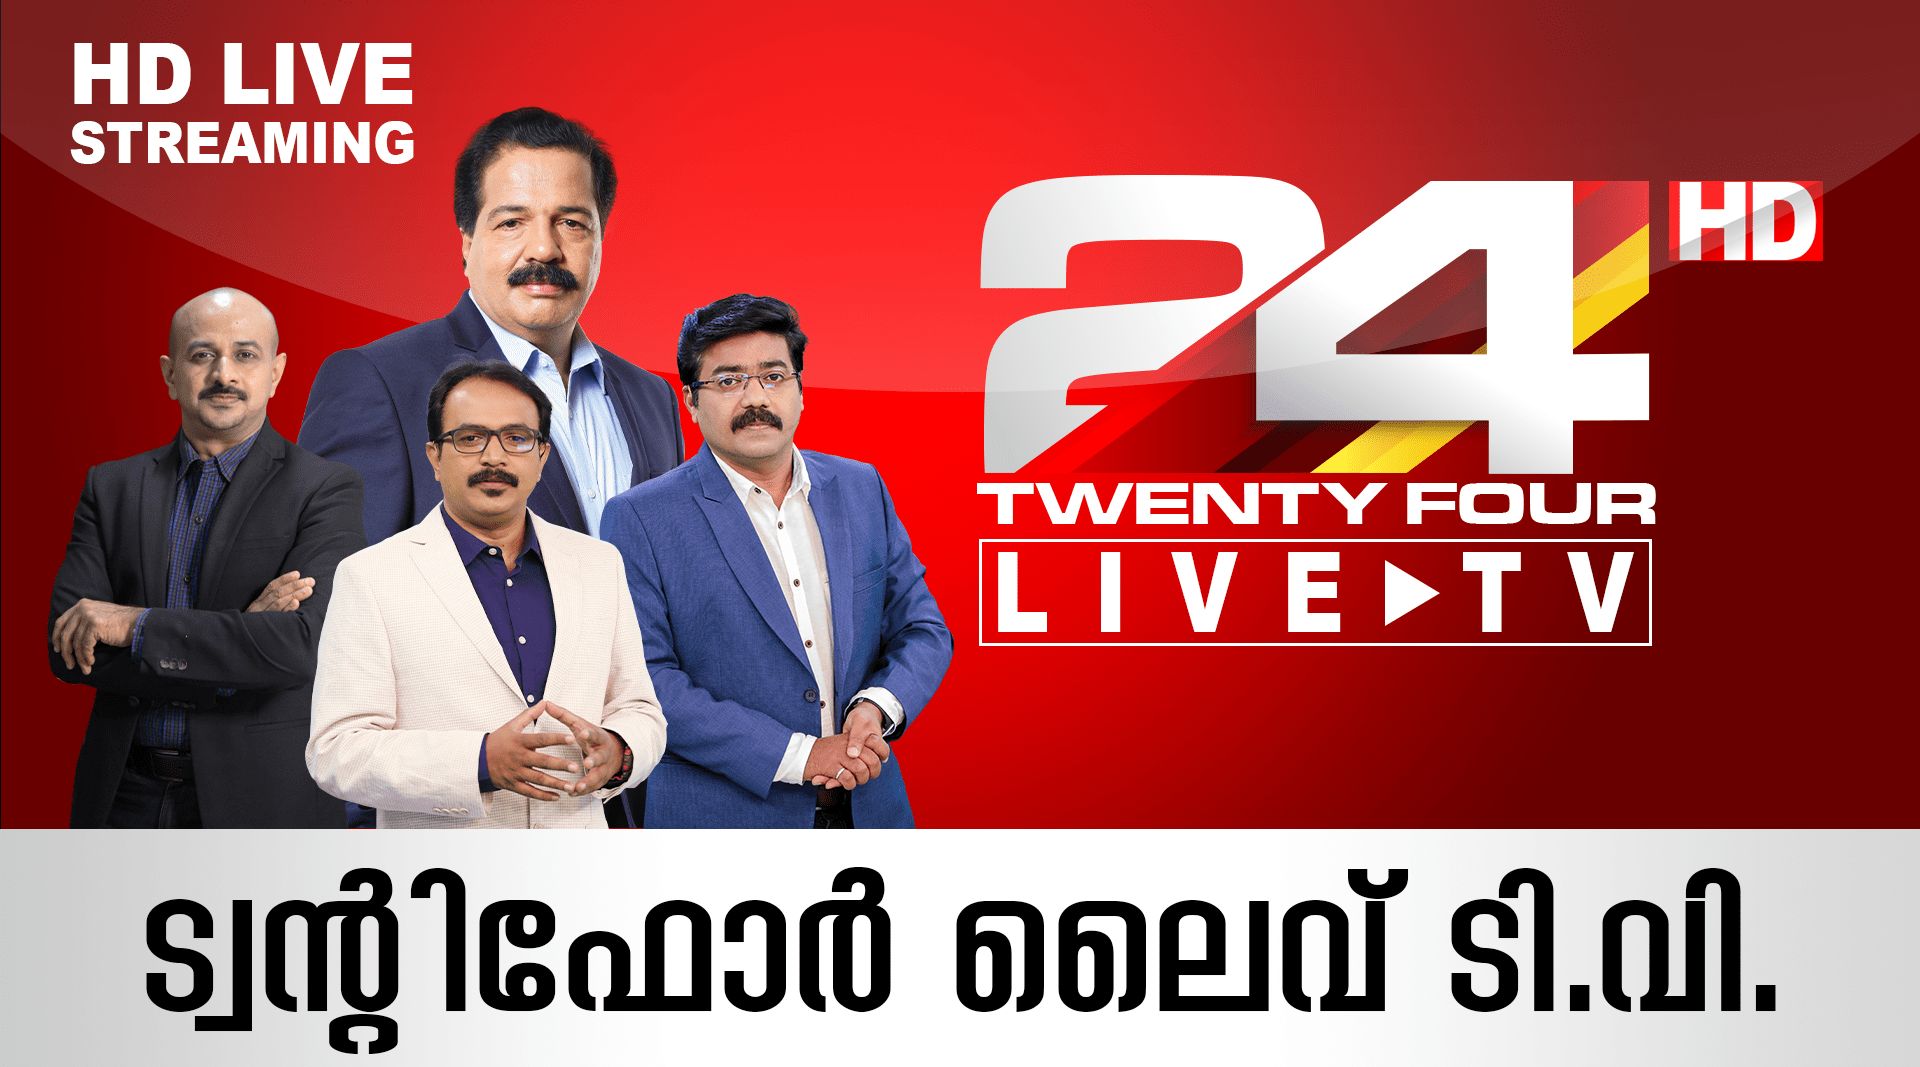 sony espn malayalam 2018 fifa world cup matches schedule - 25th June to 1st July 6